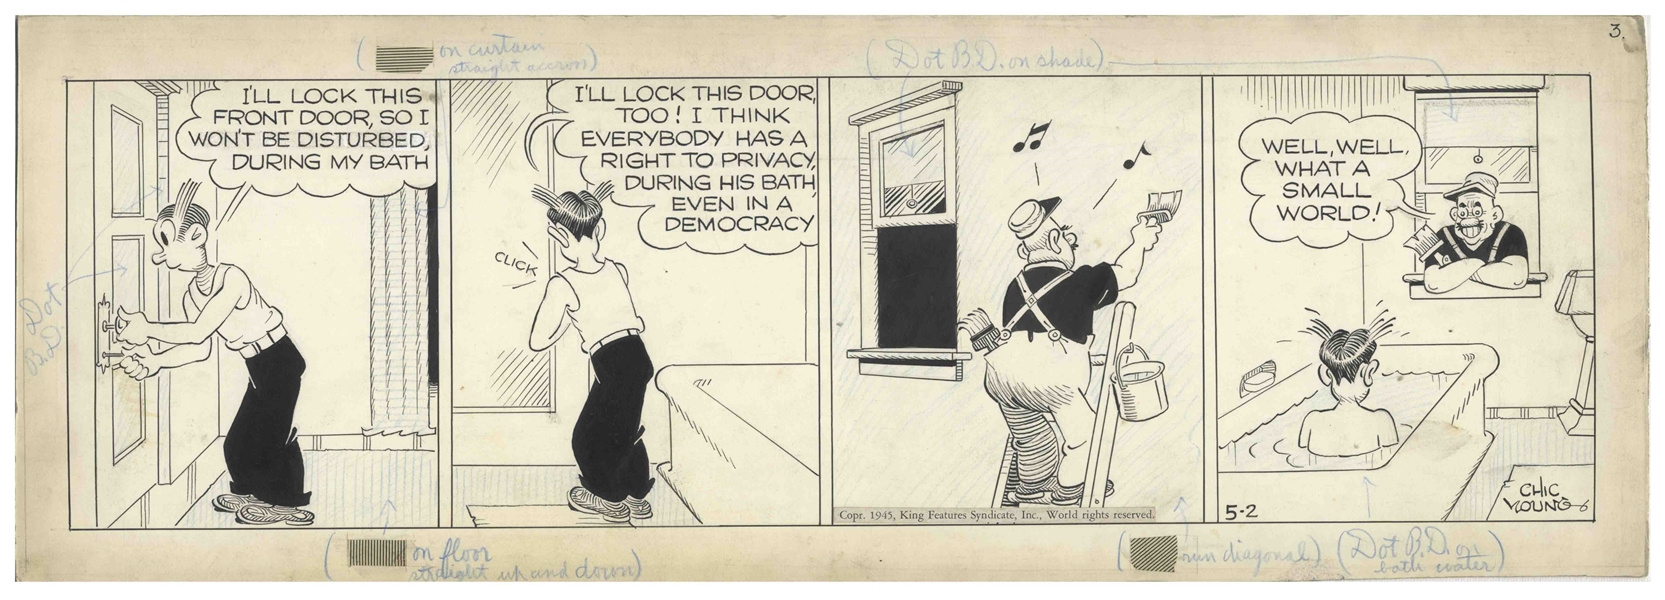 Chic Young Hand-Drawn ''Blondie'' Comic Strip From 1945 Titled ''You Can't Win!'' -- Dagwood Can't Even Get a Little Privacy During His Bath